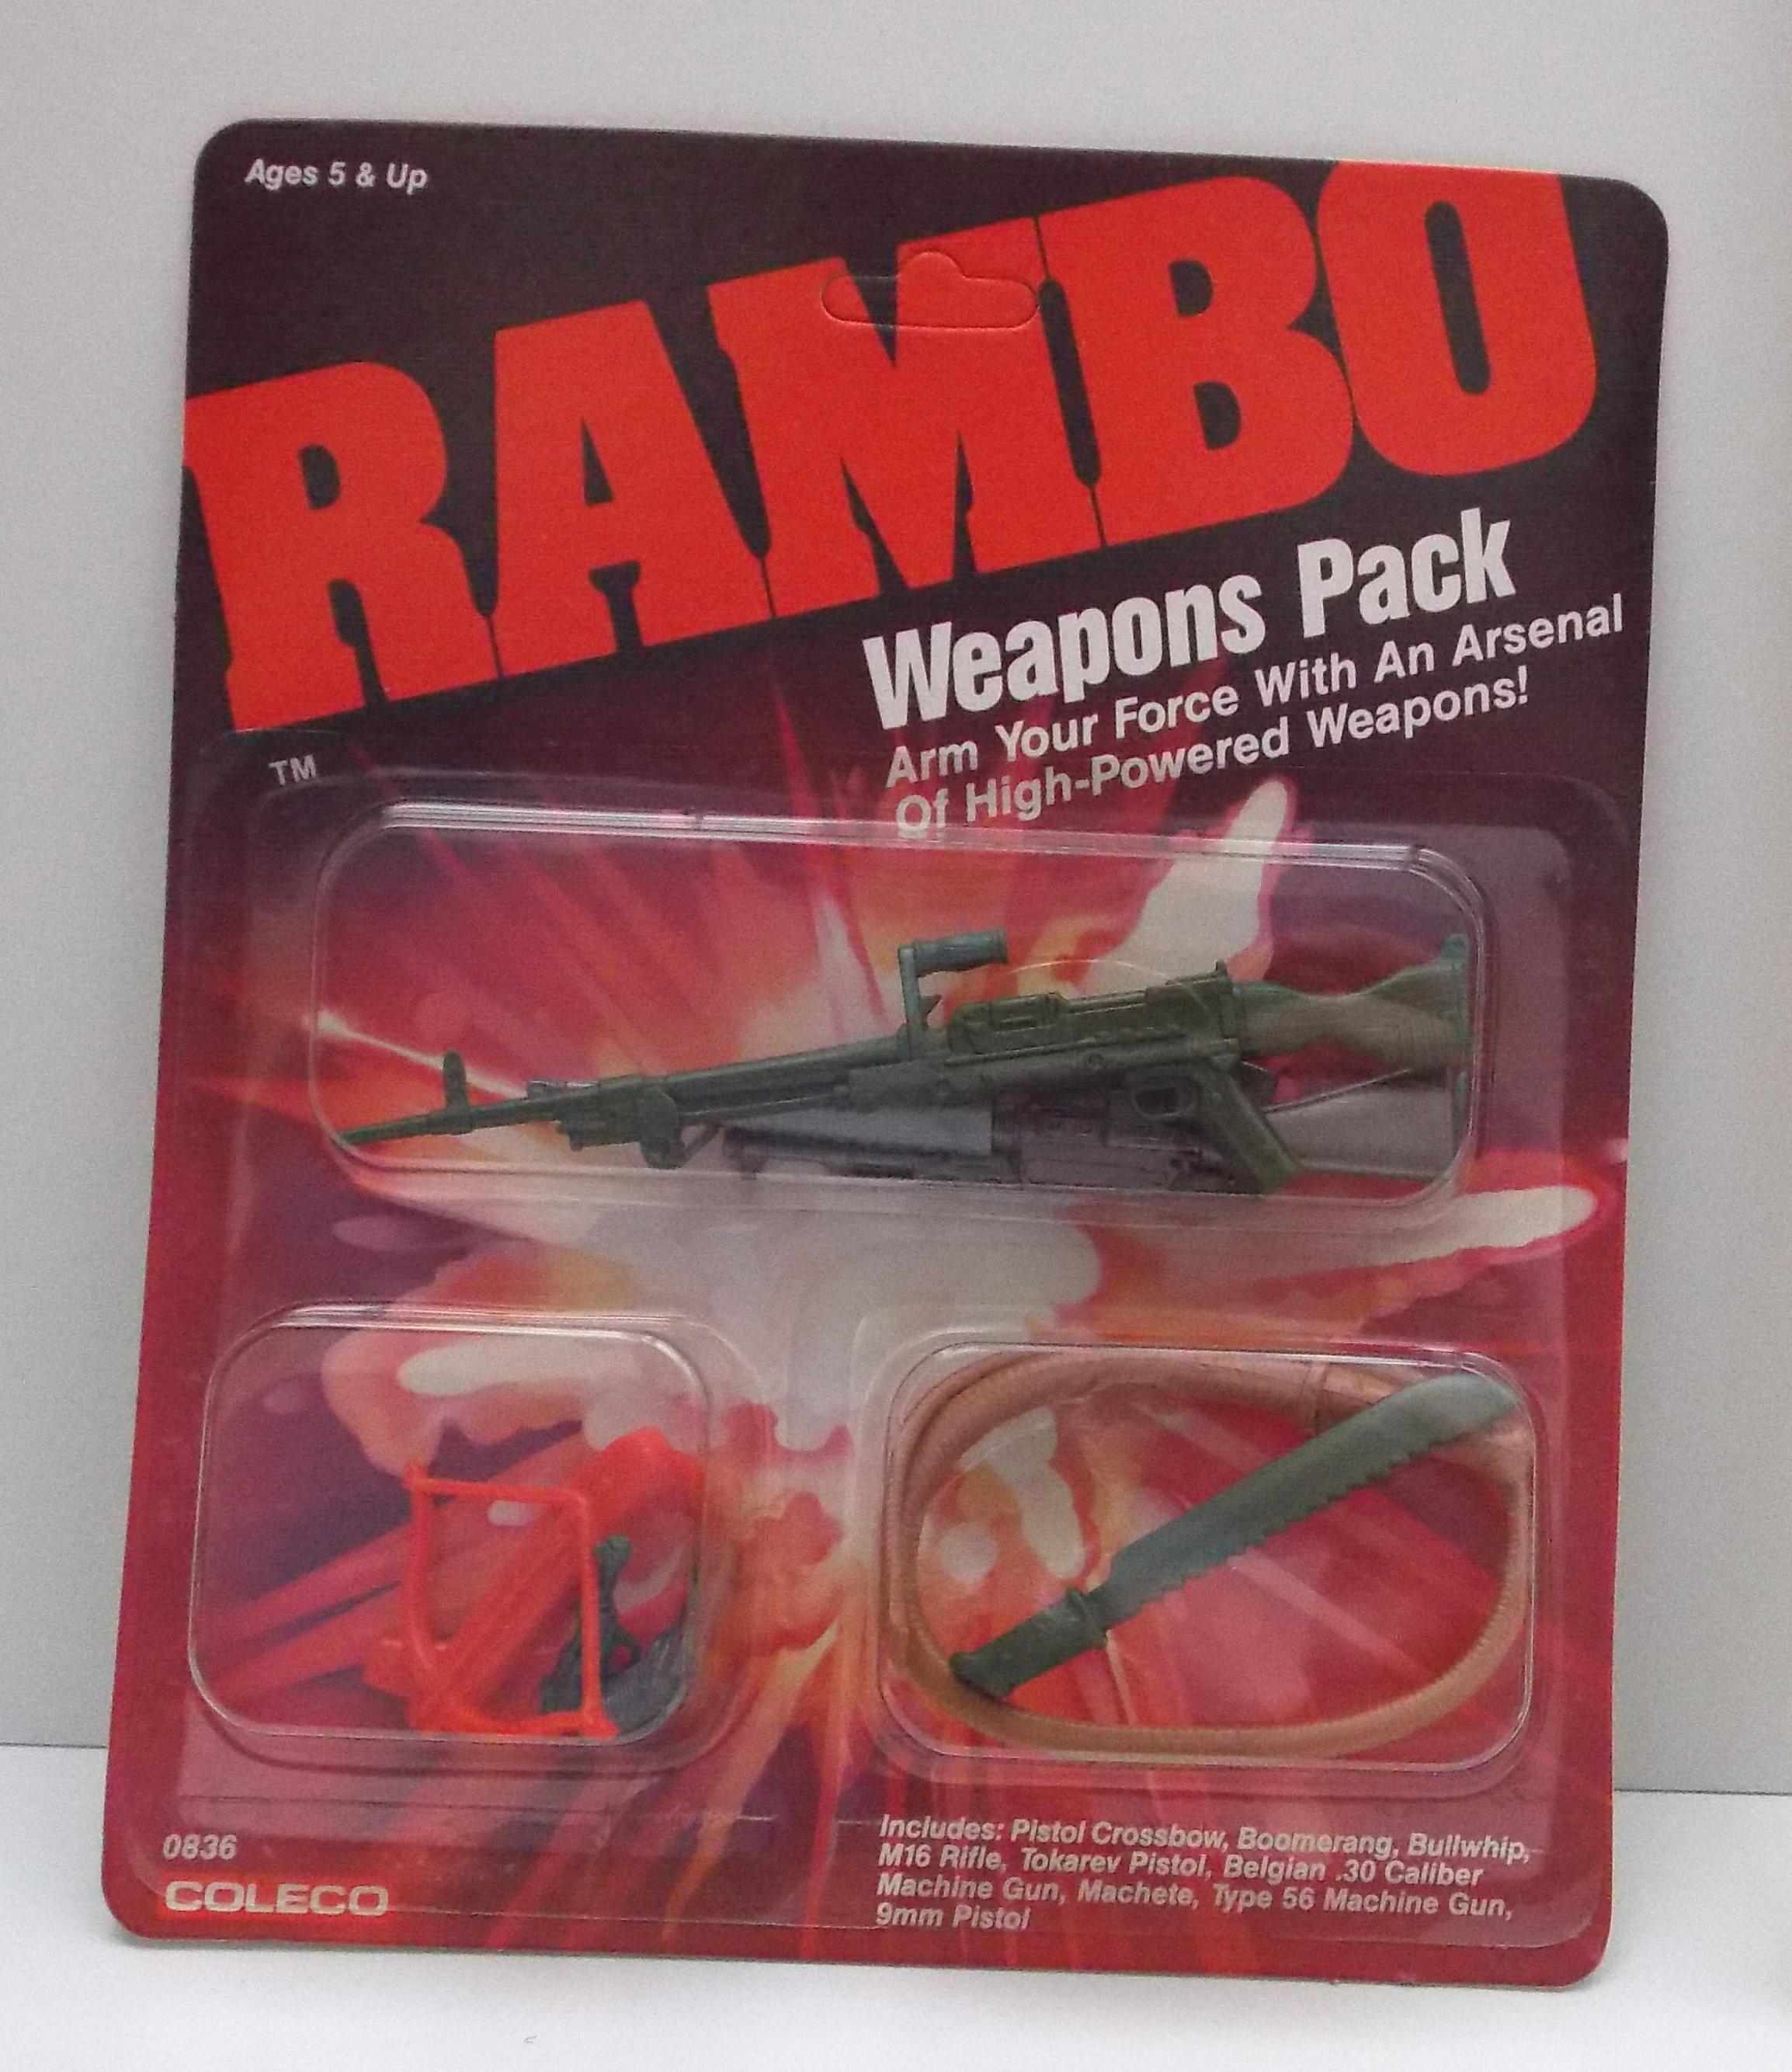 Vintage 1985 Coleco Rambo Action Figure Weapons Pack _______________________________________________